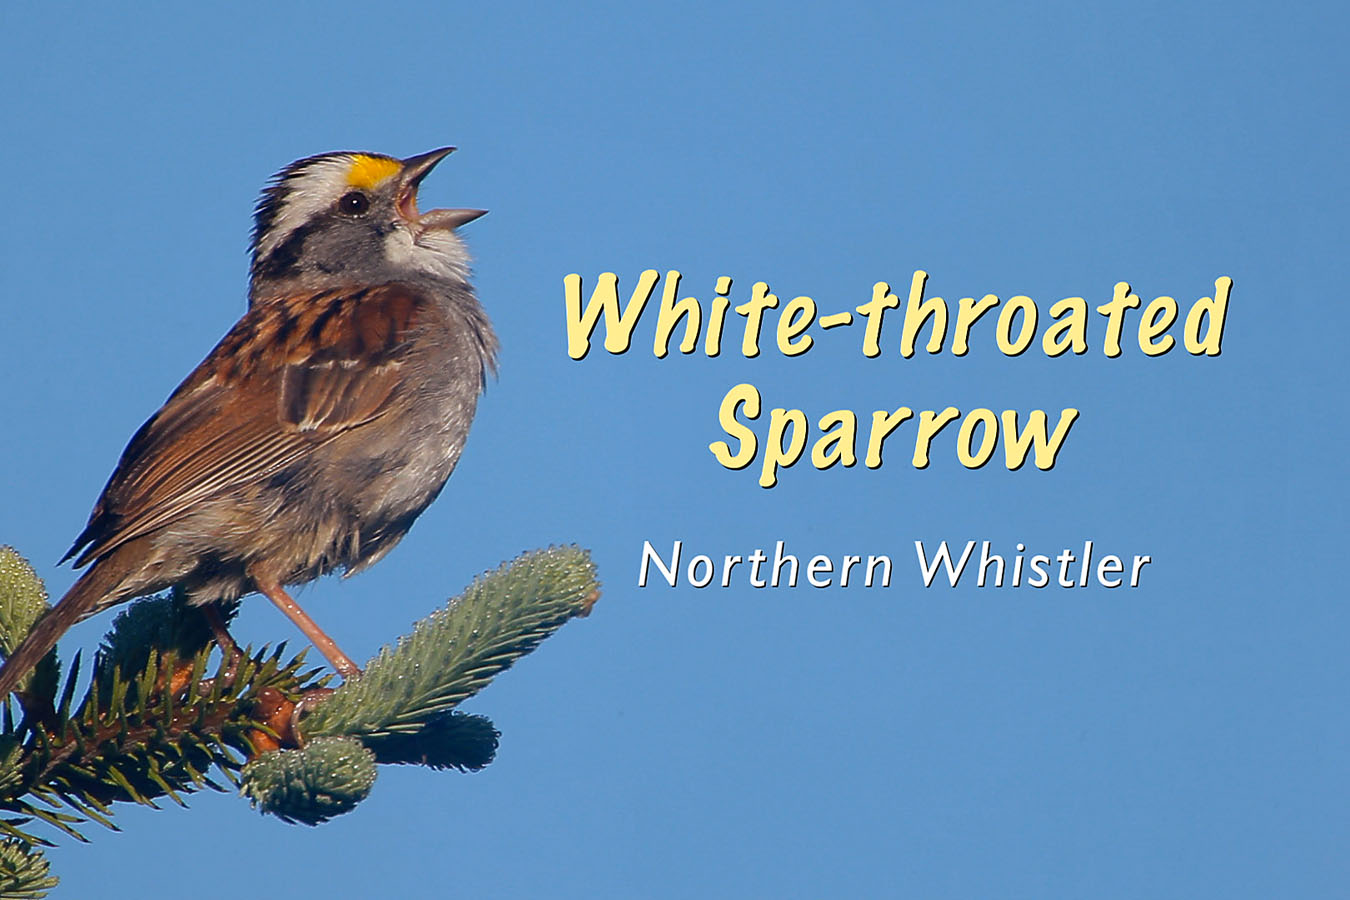 Protected: White-throated Sparrow